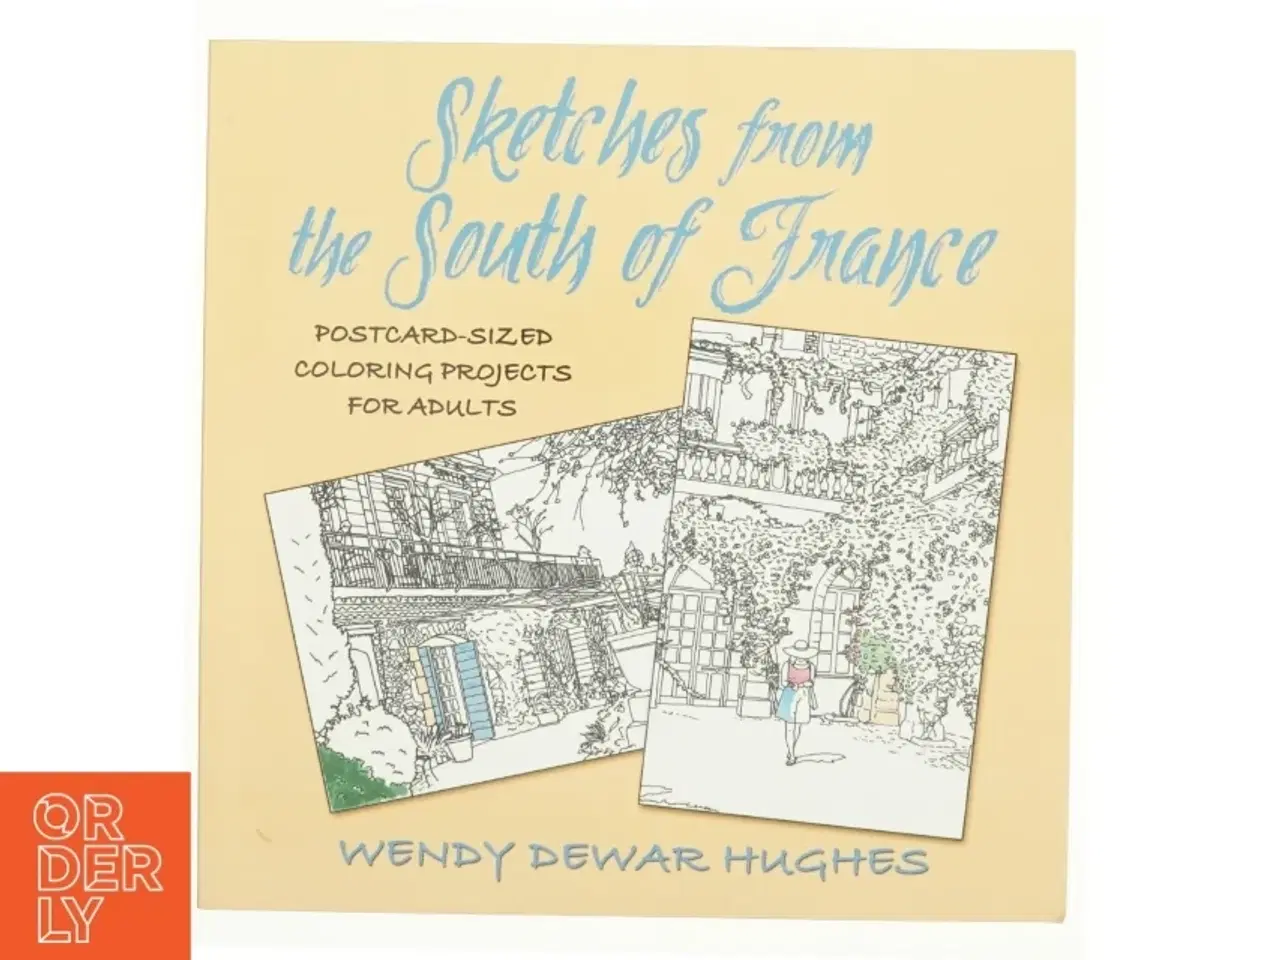 Billede 1 - Sketches from the South of France: Postcard Sized Coloring Projects for Adults af Wendy Dewar Hughes (Bog)